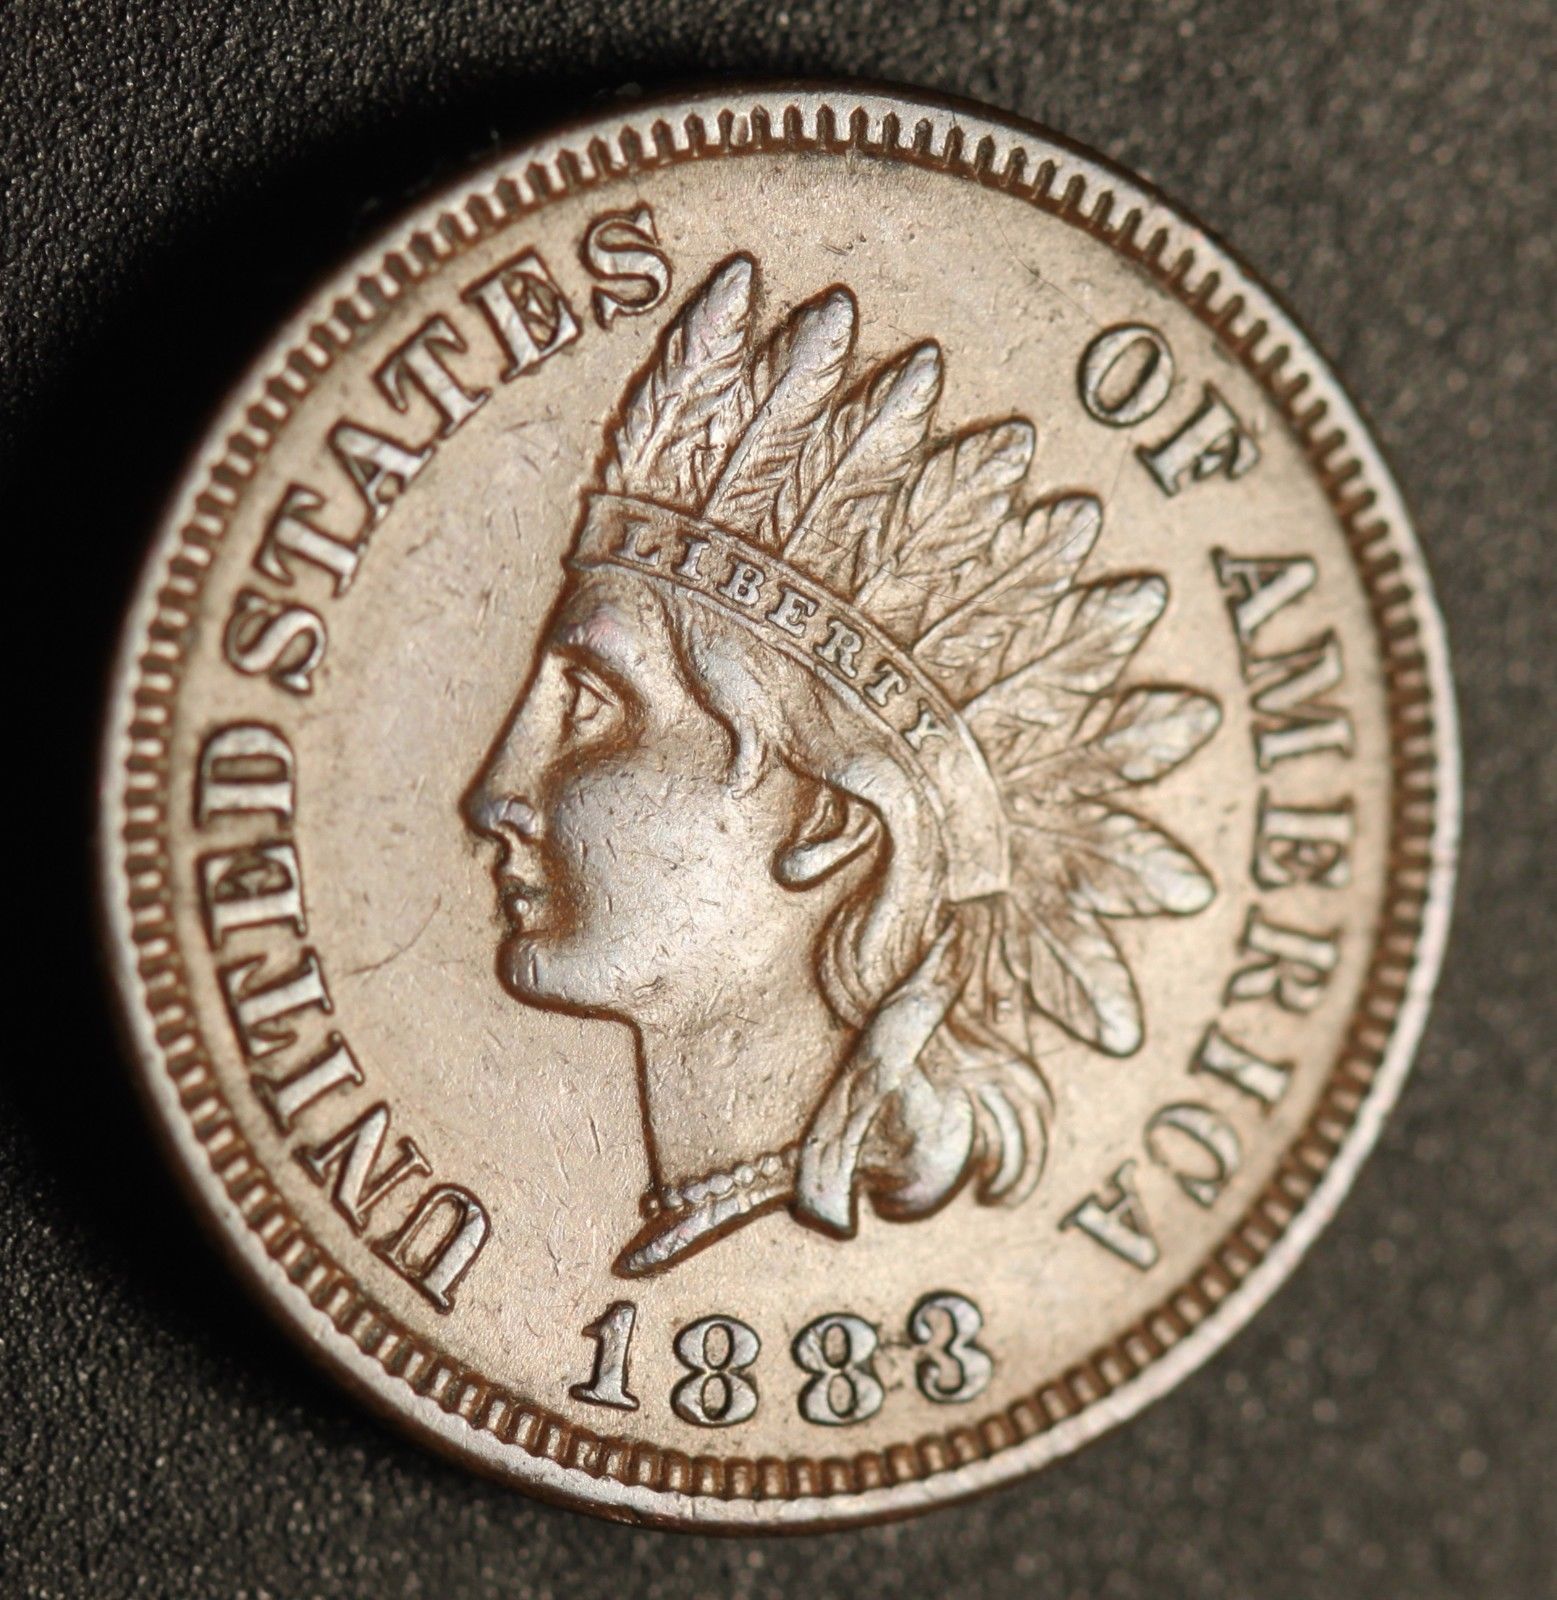 1883 RPD-003 - Indian Head Penny - Photo by Ed Nathanson